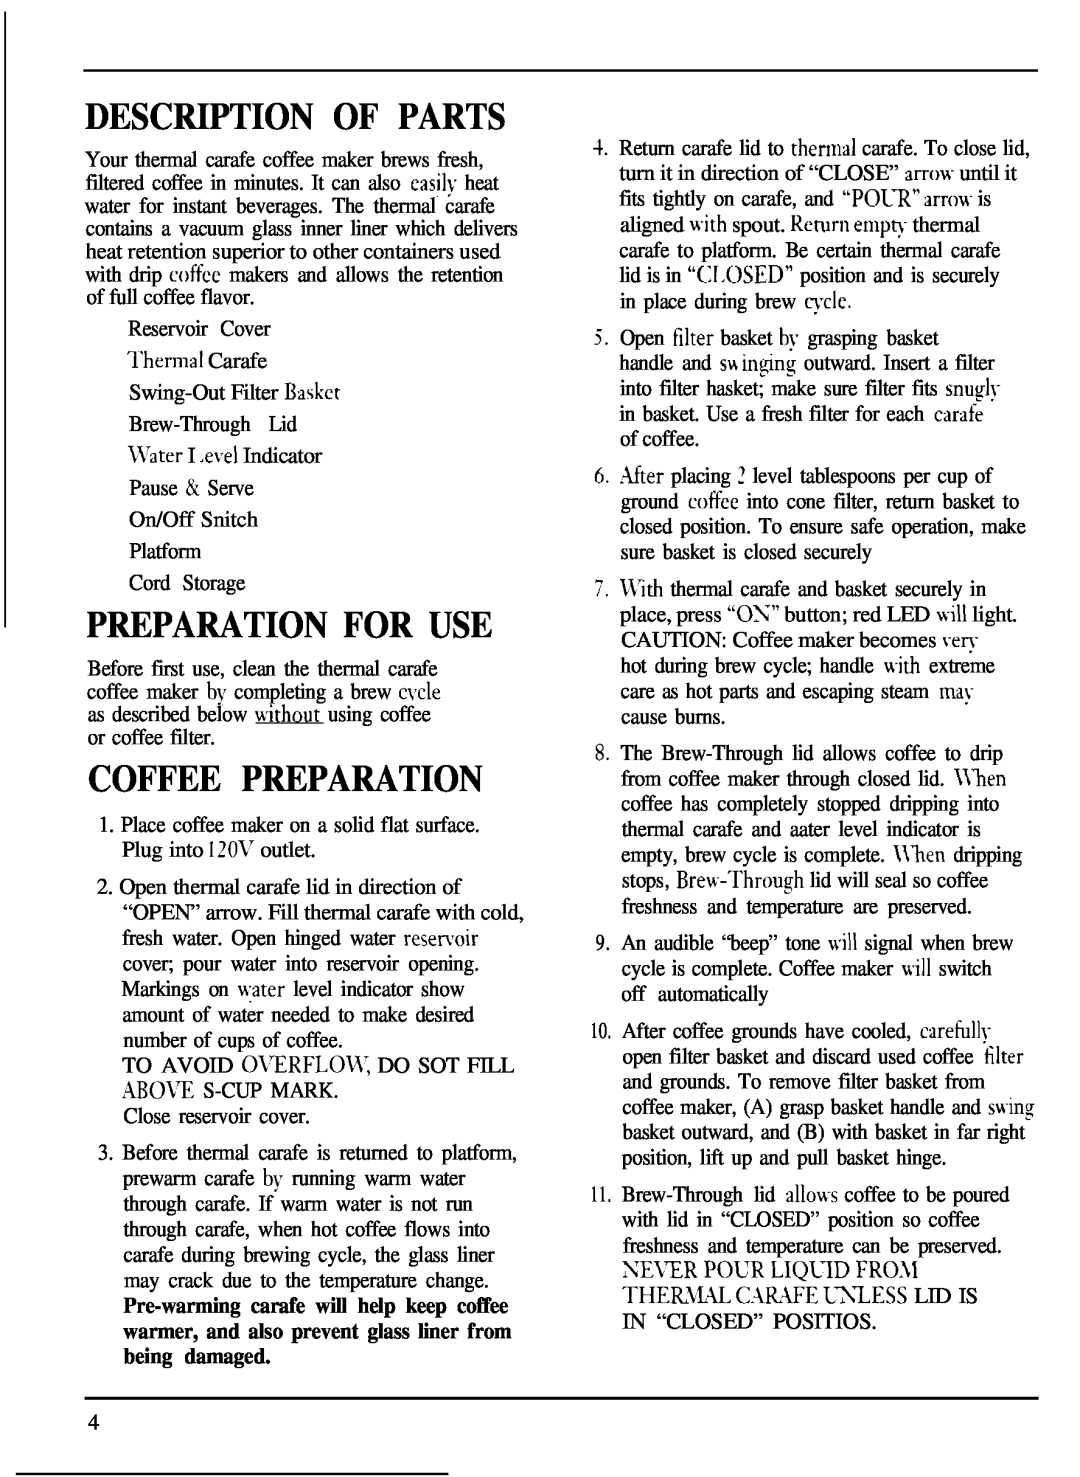 Cuisinart DTC-800 Series manual Description Of Parts, Preparation For Use, Coffee Preparation 